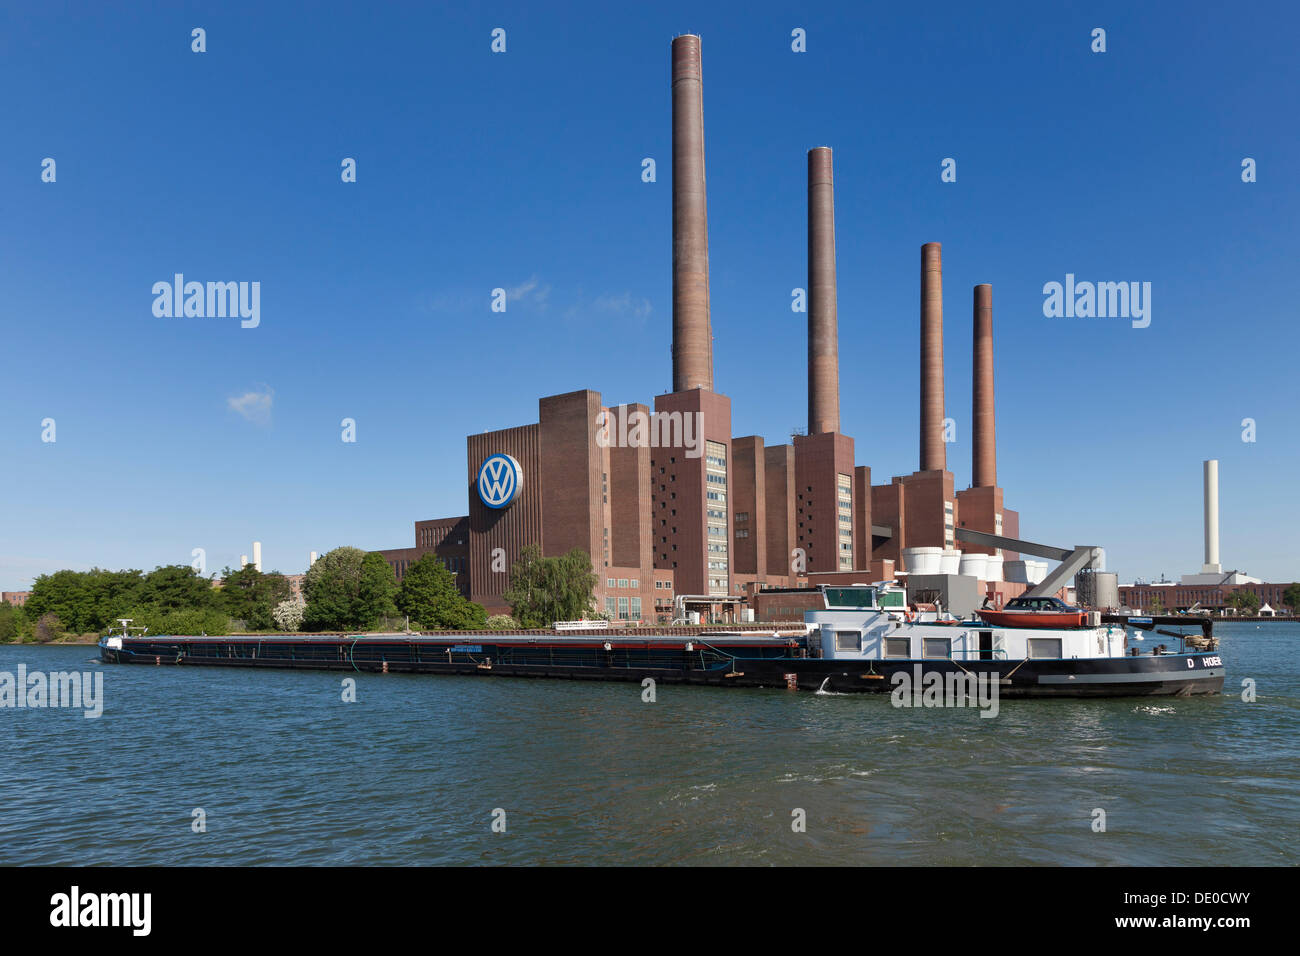 Power plant of the Volkswagen Group on the Mittellandkanal canal, Wolfsburg, Lower Saxony Stock Photo